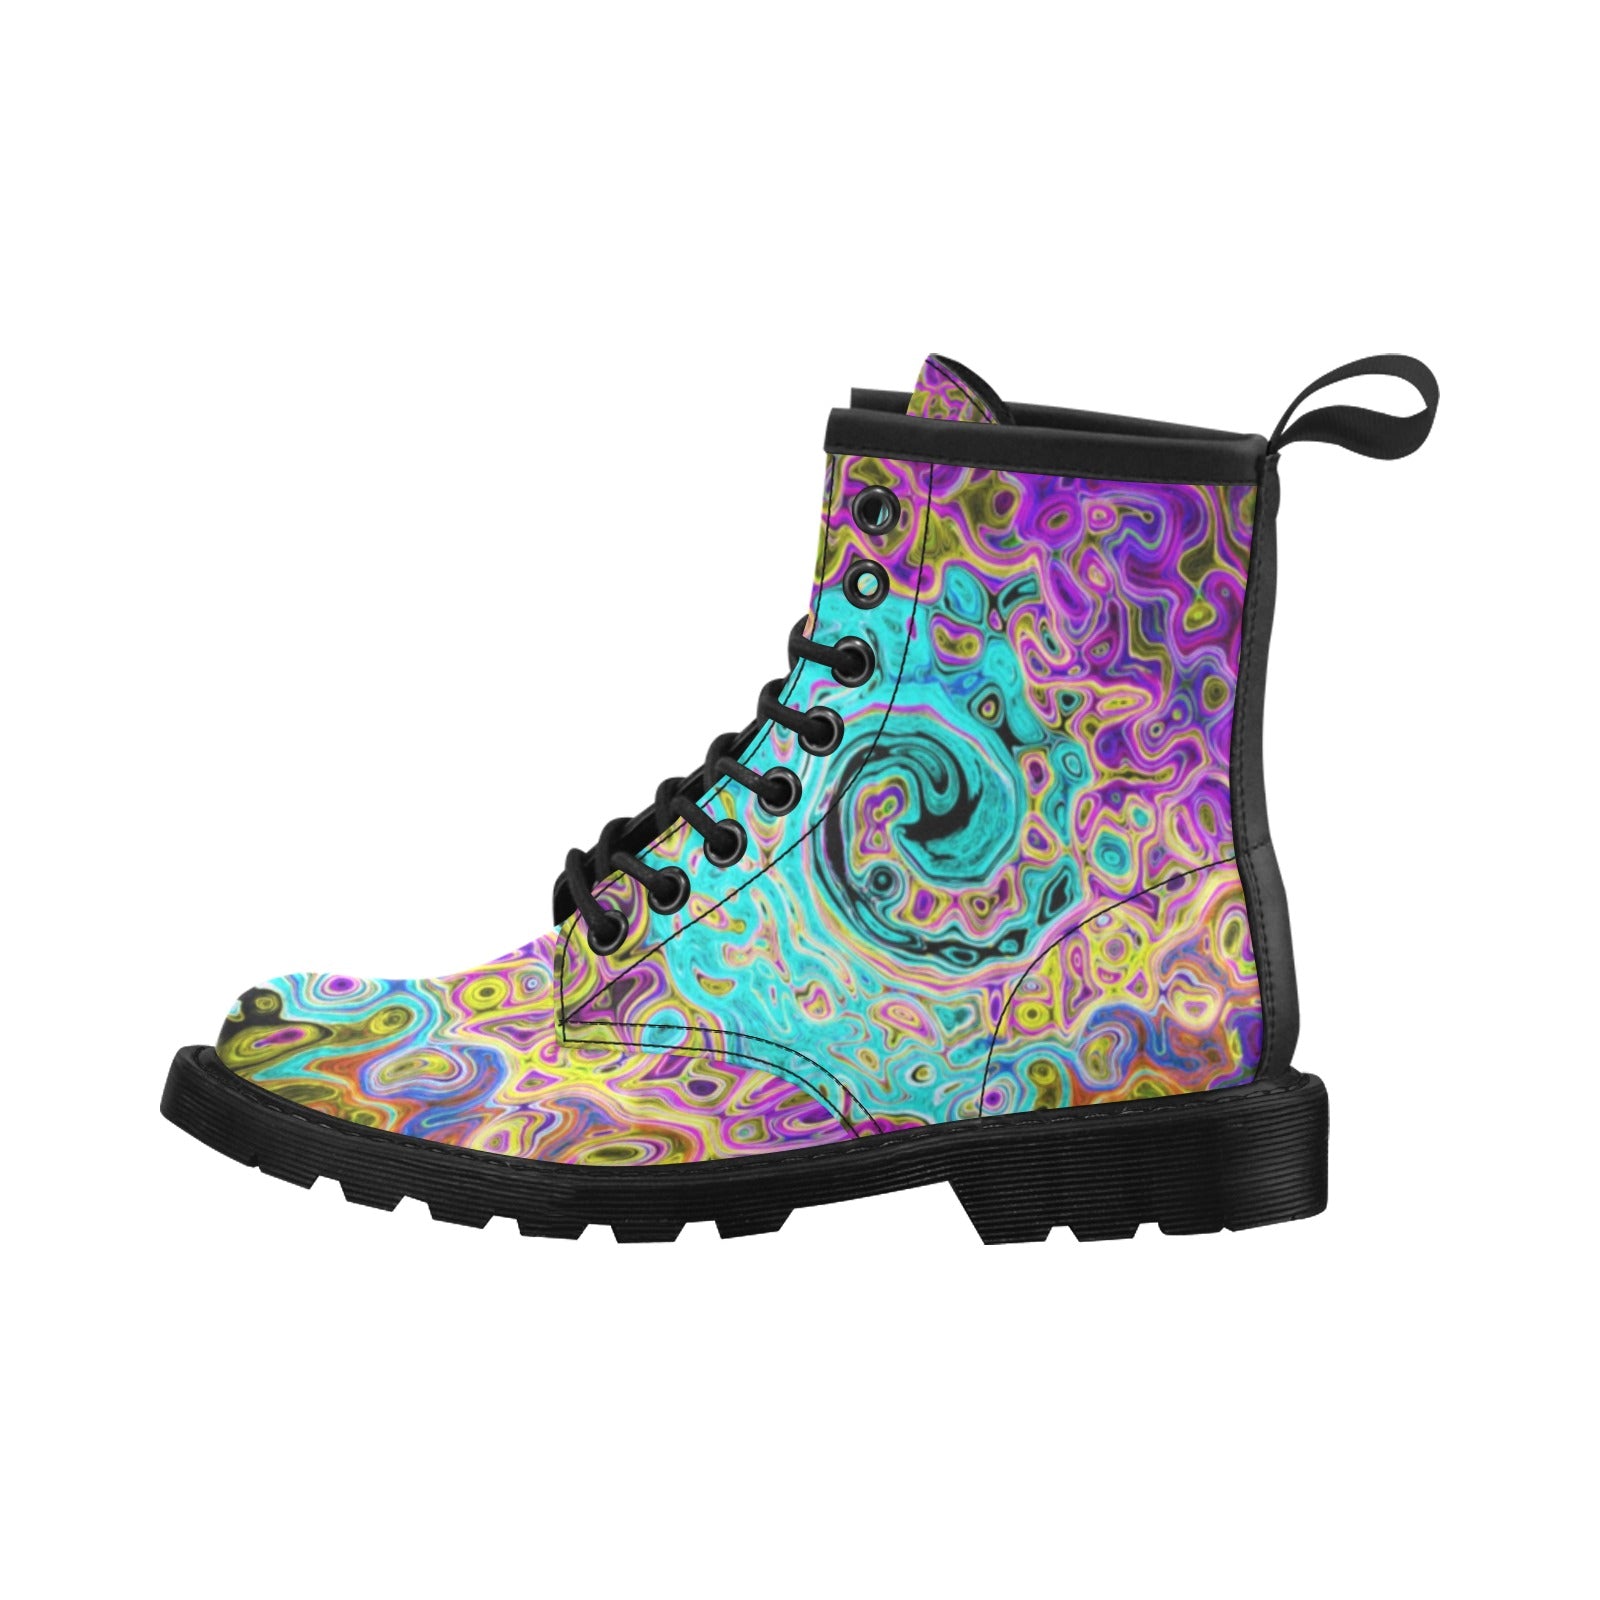 Lace Up Boots for Women - Icy Aqua Blue Groovy Abstract Retro Liquid Swirl